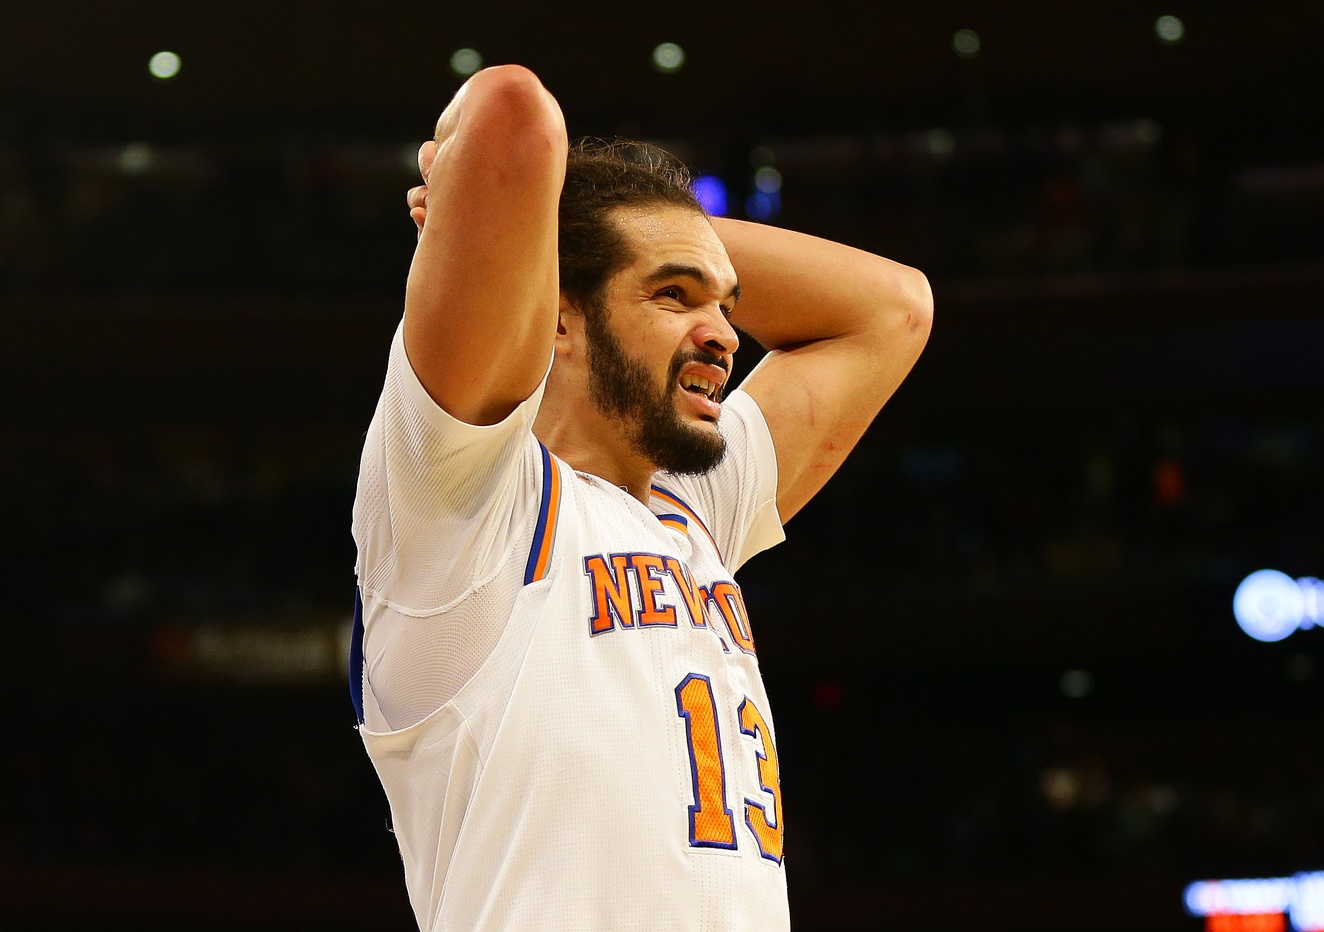 Timberwolves reportedly interested in Luol Deng, Joakim Noah